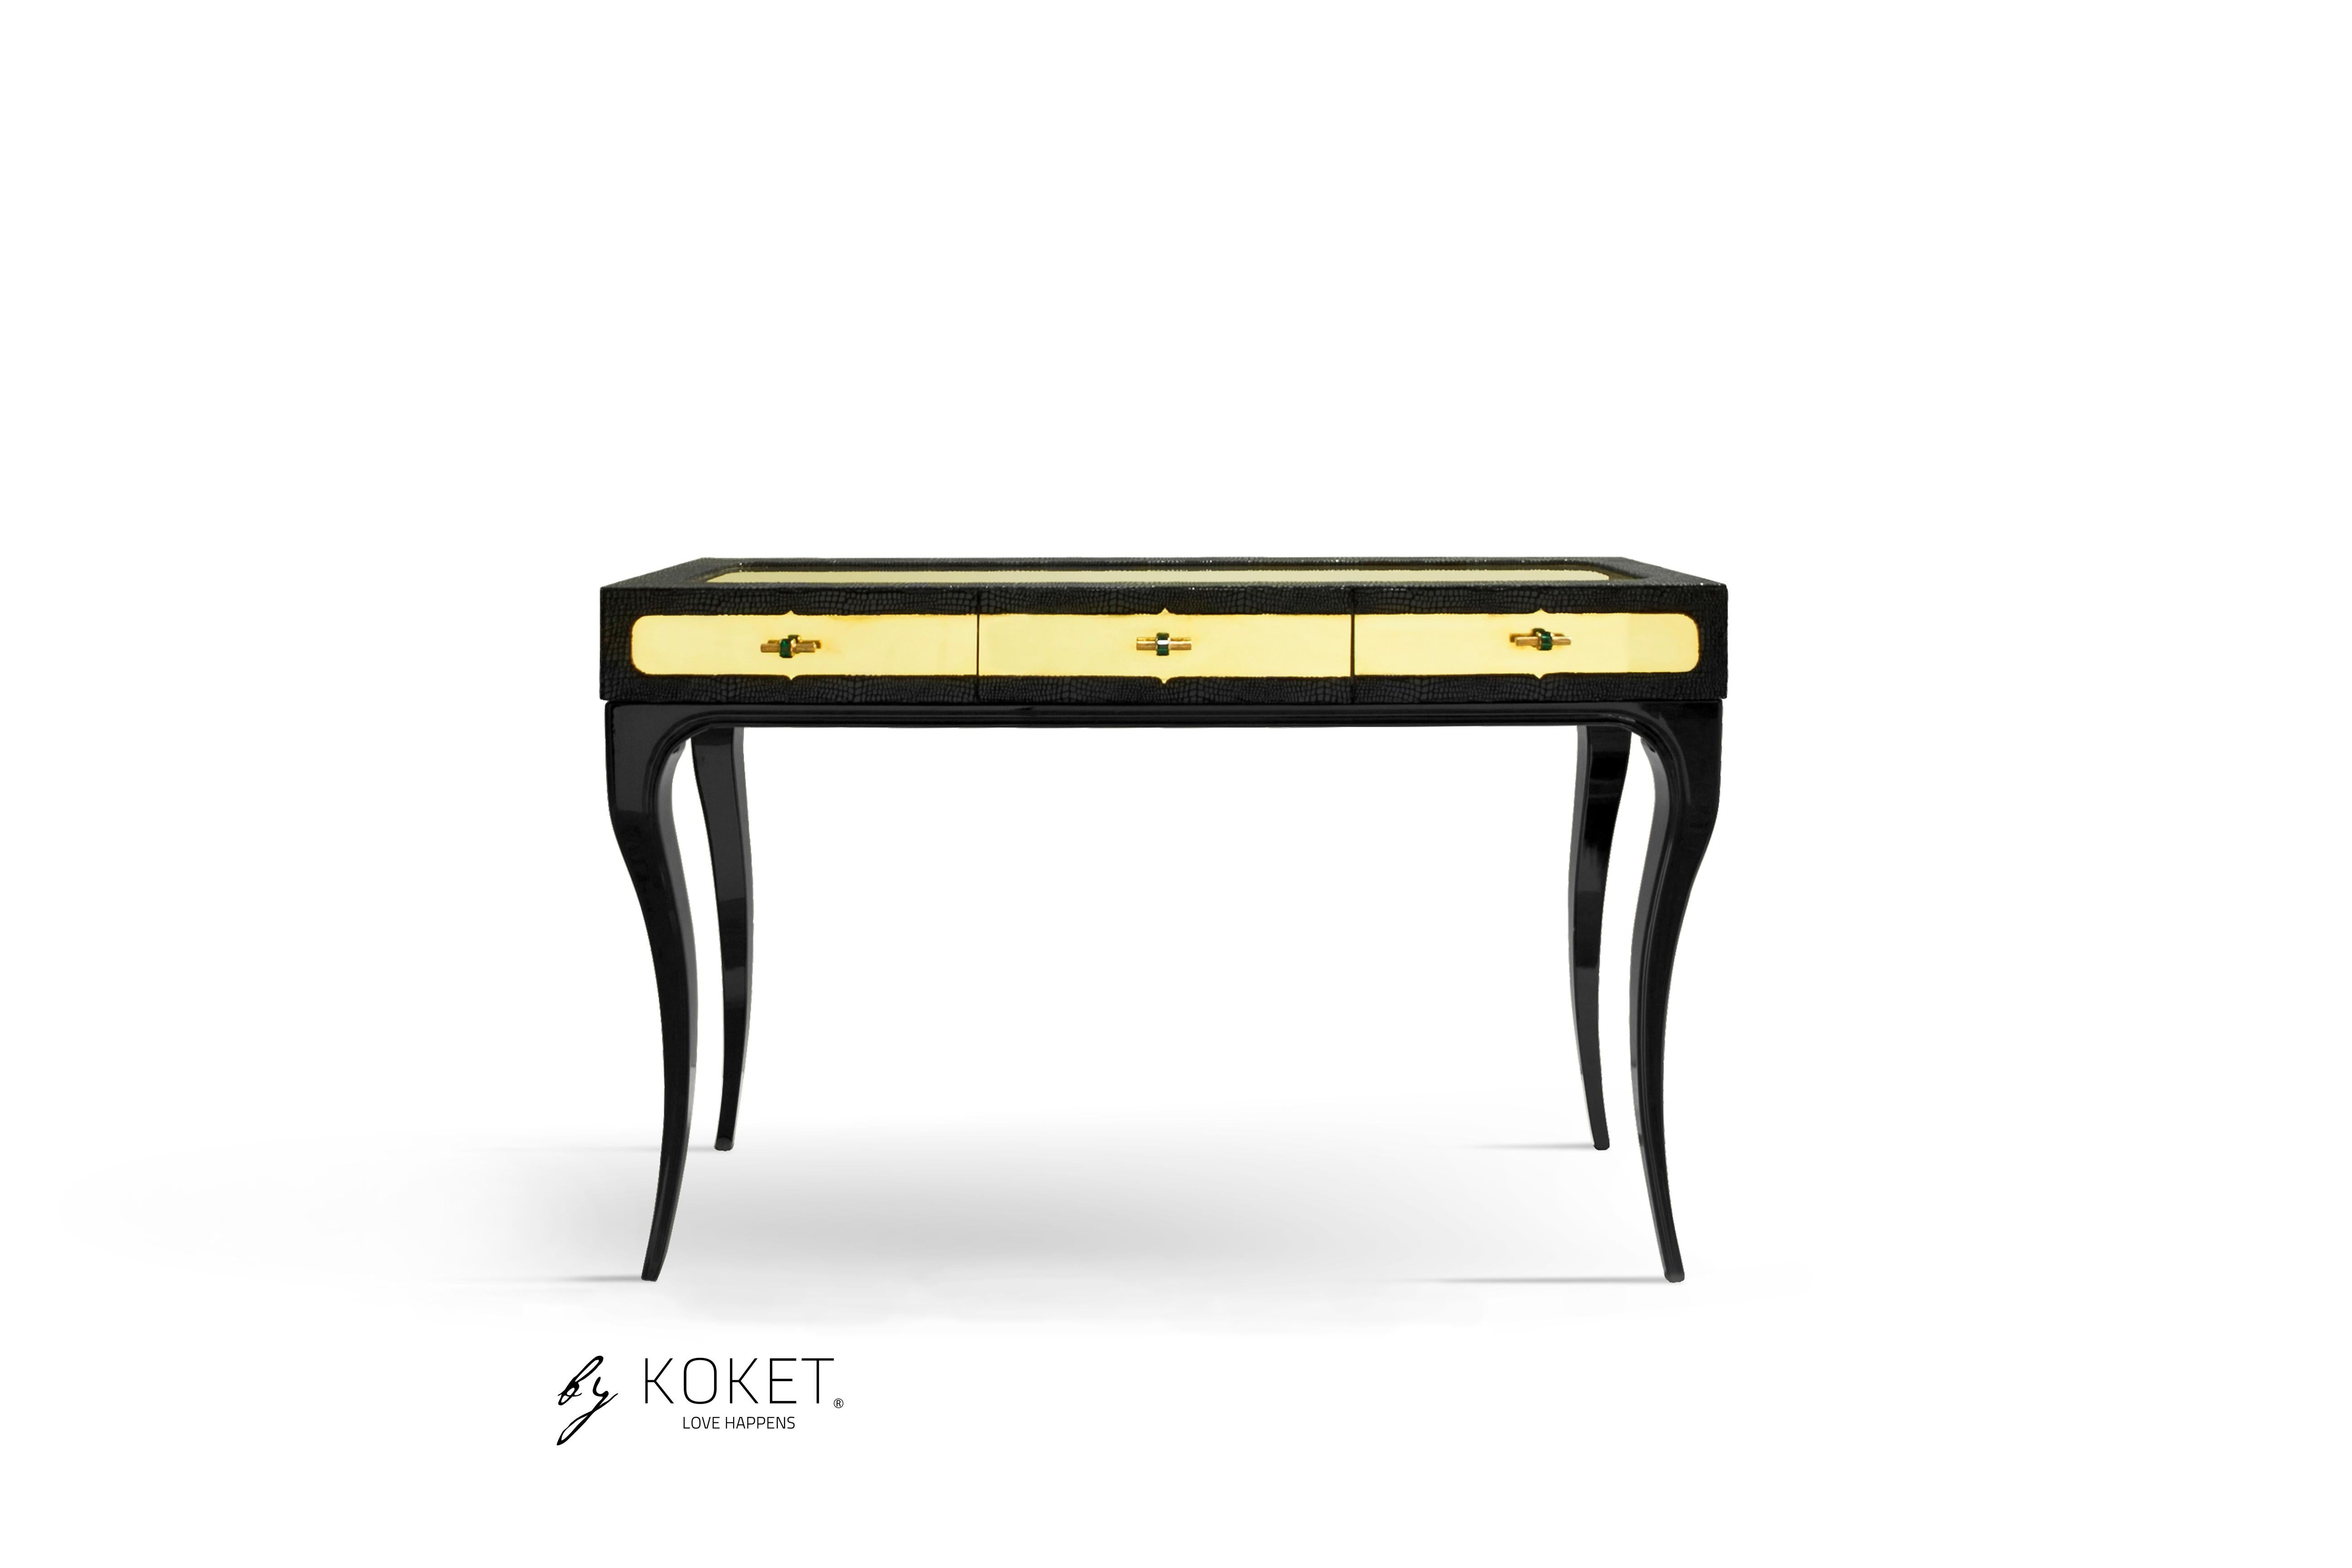 Exuding feelings of fantasy, this highly coveted desk is bold, daring and seductive. Her wooden frame is cloaked in an exotic fabric with a complementing metal top, juxtaposed with the mesmerizing movements of shimmering glass tassels.

Top: